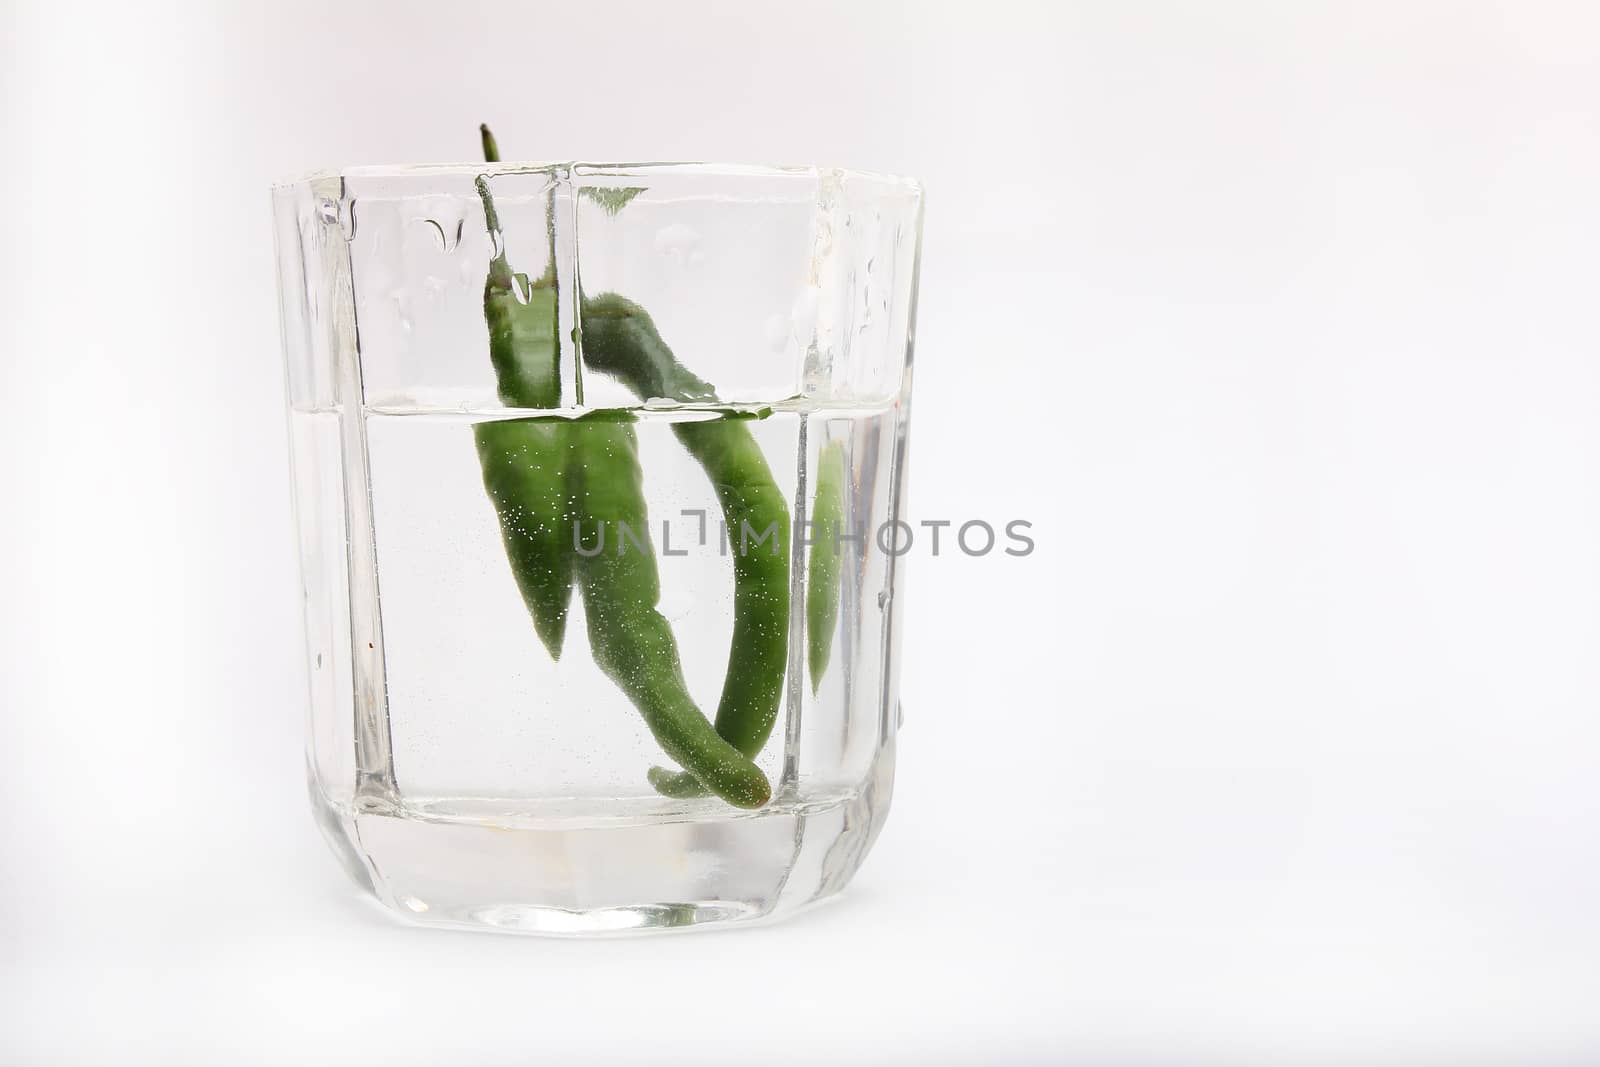 green chilli in water